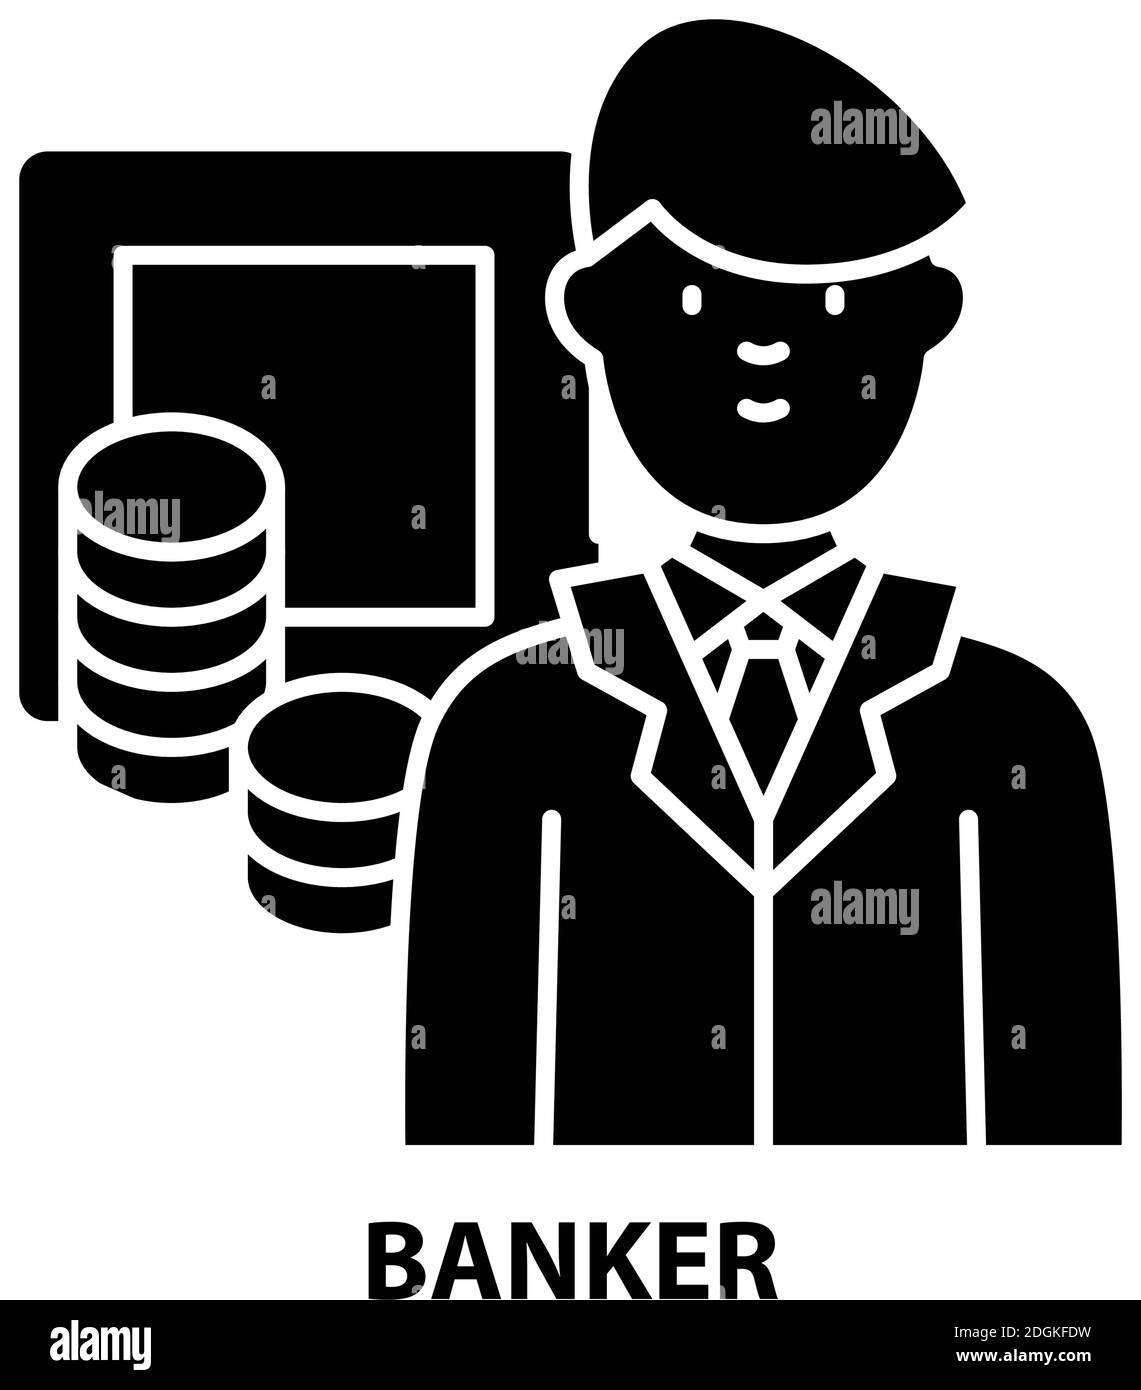 banker icon, black vector sign with editable strokes, concept illustration Stock Vector